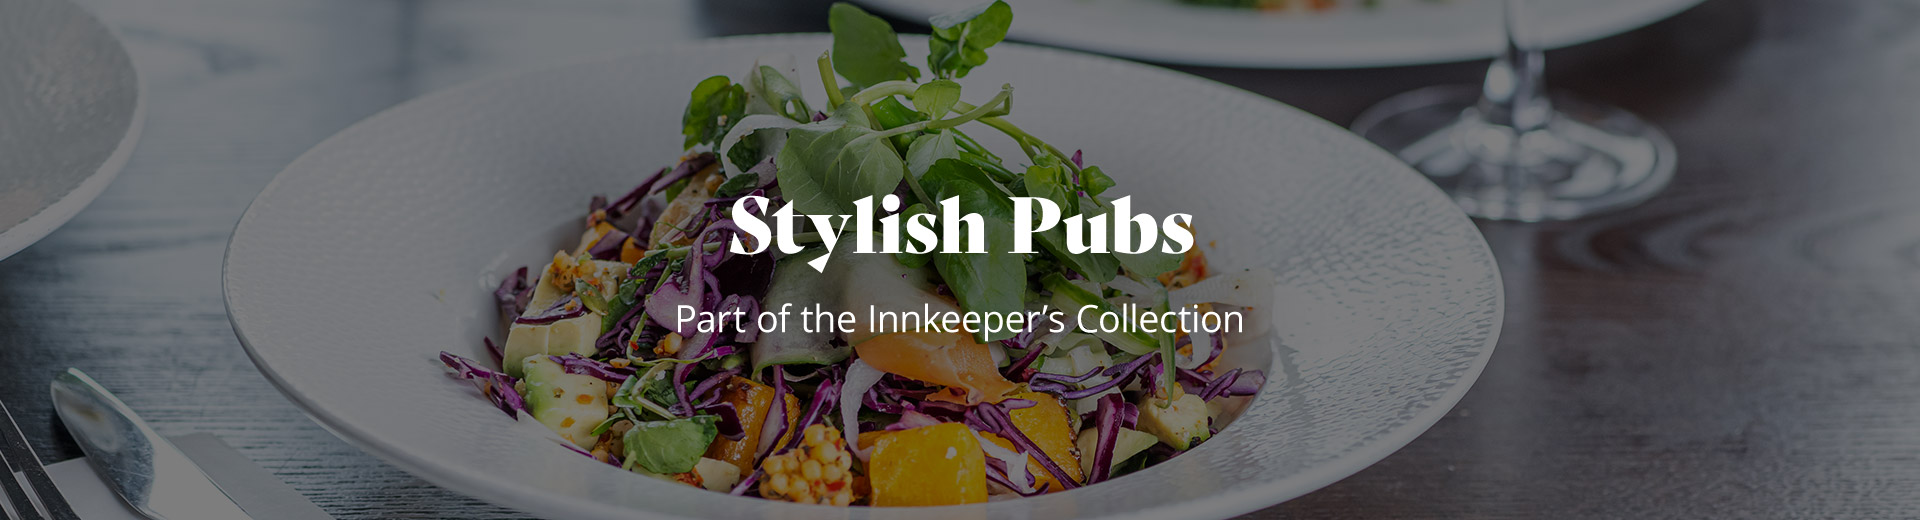 Food and Drink at Stylish Pubs